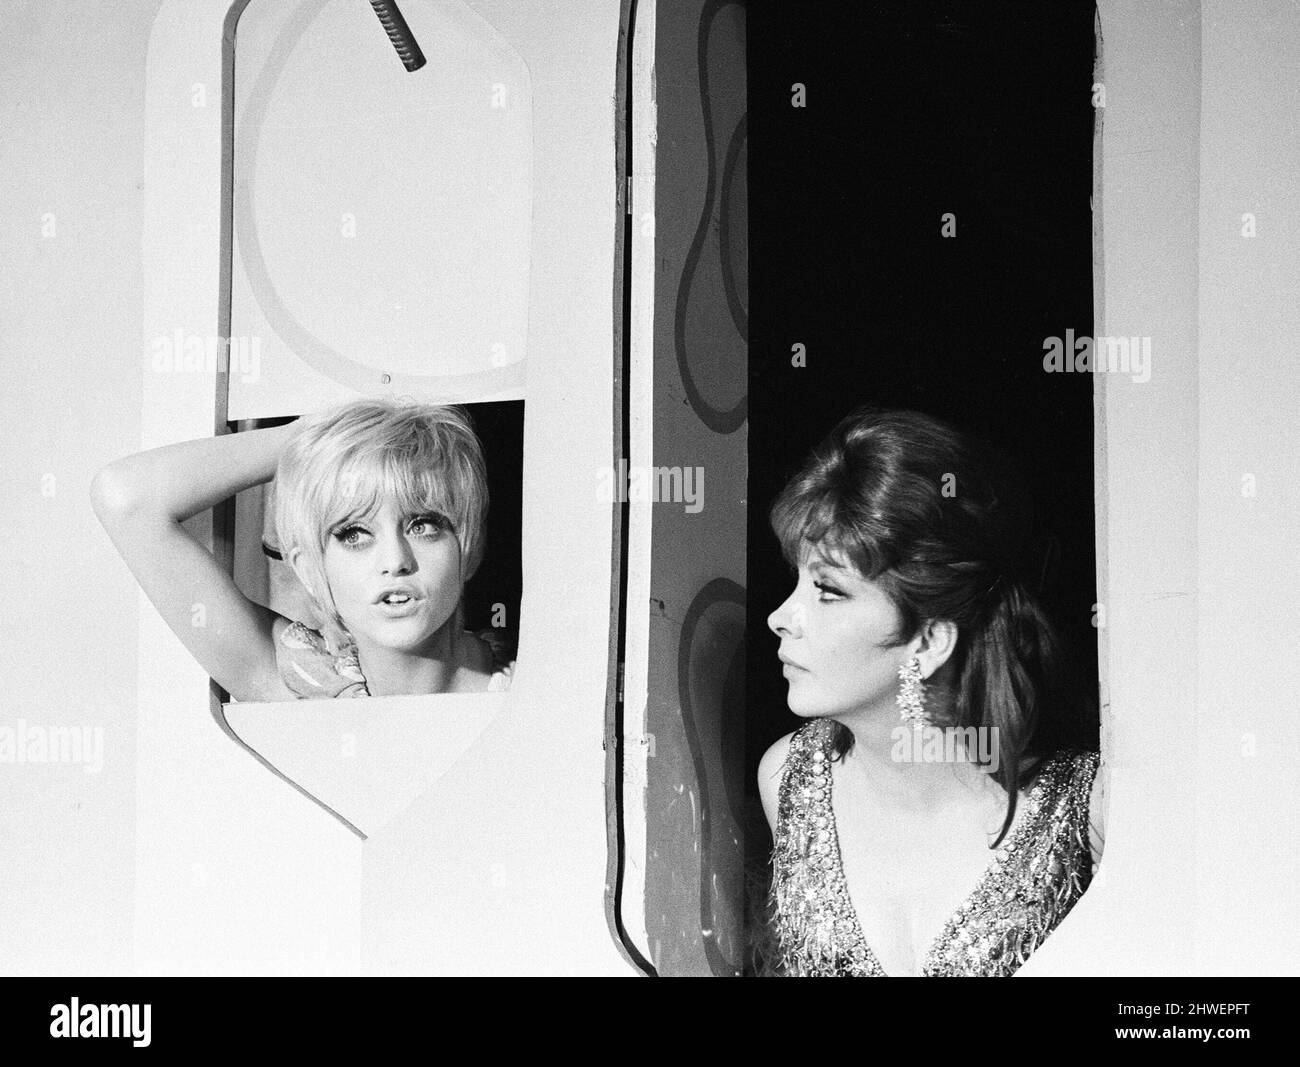 Rowan & Martin's Laugh-In, an American sketch comedy television program on the NBC television network, behind the scenes filming for series 2 episode 22, (aired Monday 3rd March 1969), in studio, Wednesday 15th January 1969. Our picture shows ... Goldie Hawn and Pamela Rodgers, American actresses and series regulars. Stock Photo